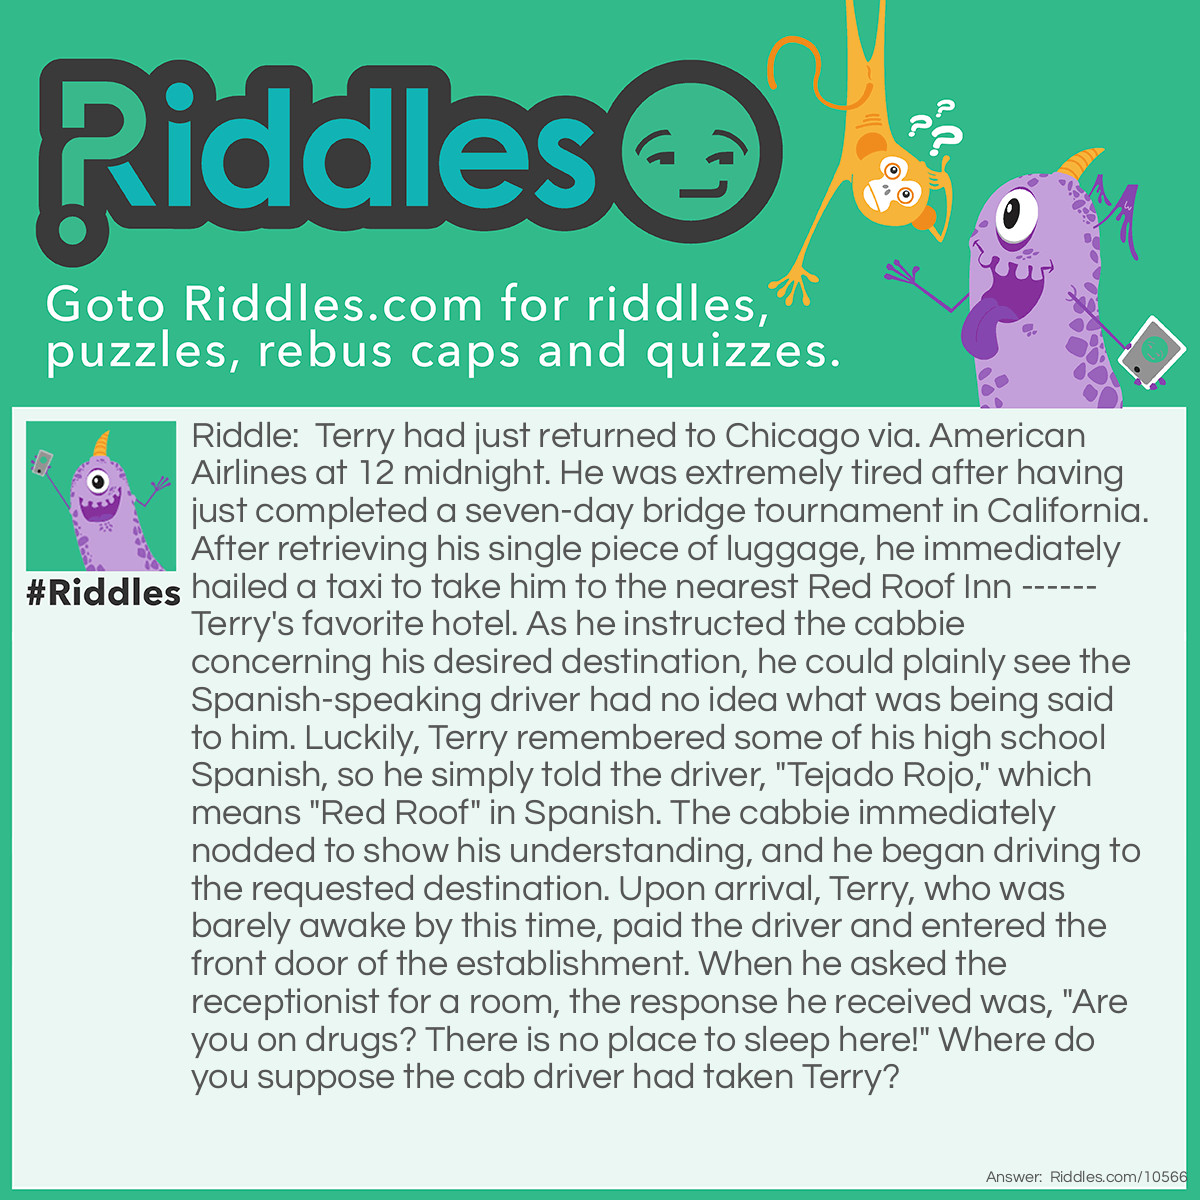 Riddle: Terry had just returned to Chicago via. American Airlines at 12 midnight. He was extremely tired after having just completed a seven-day bridge tournament in California. After retrieving his single piece of luggage, he immediately hailed a taxi to take him to the nearest Red Roof Inn ------ Terry's favorite hotel. As he instructed the cabbie concerning his desired destination, he could plainly see the Spanish-speaking driver had no idea what was being said to him. Luckily, Terry remembered some of his high school Spanish, so he simply told the driver, "Tejado Rojo," which means "Red Roof" in Spanish. The cabbie immediately nodded to show his understanding, and he began driving to the requested destination. Upon arrival, Terry, who was barely awake by this time, paid the driver and entered the front door of the establishment. When he asked the receptionist for a room, the response he received was, "Are you on drugs? There is no place to sleep here!" Where do you suppose the cab driver had taken Terry? Answer: The closest Pizza Hut. Almost, if not all of them have red roofs.